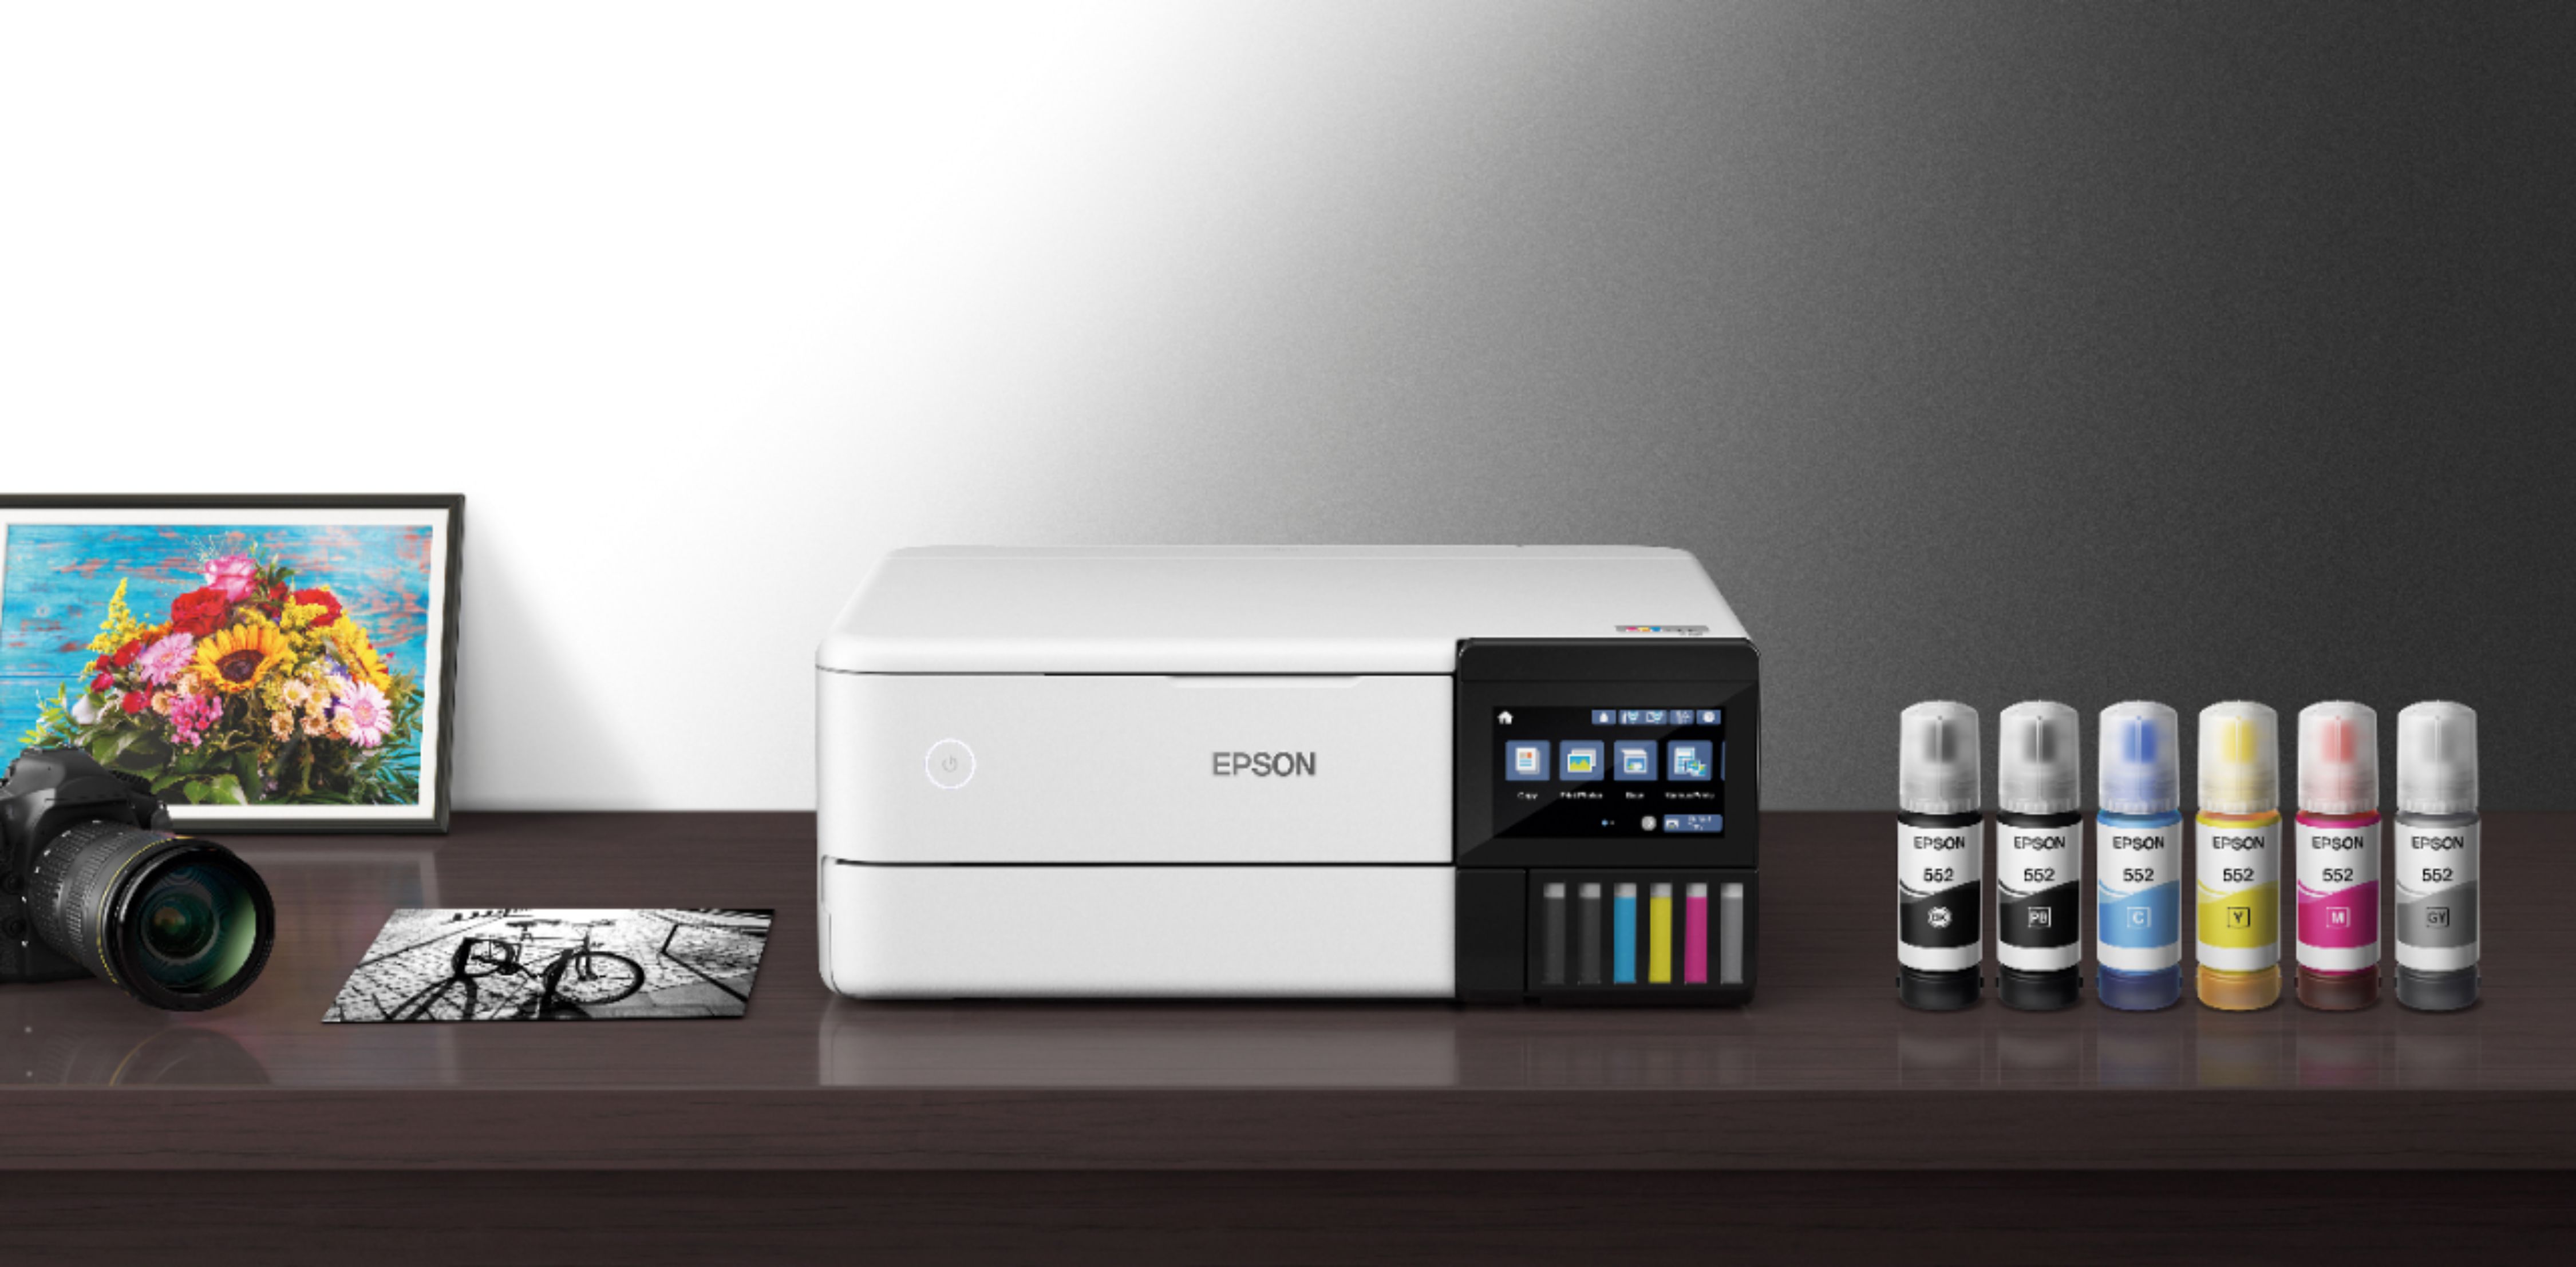 Epson EcoTank® Photo ET-8500 Wireless Color All-in-One Supertank